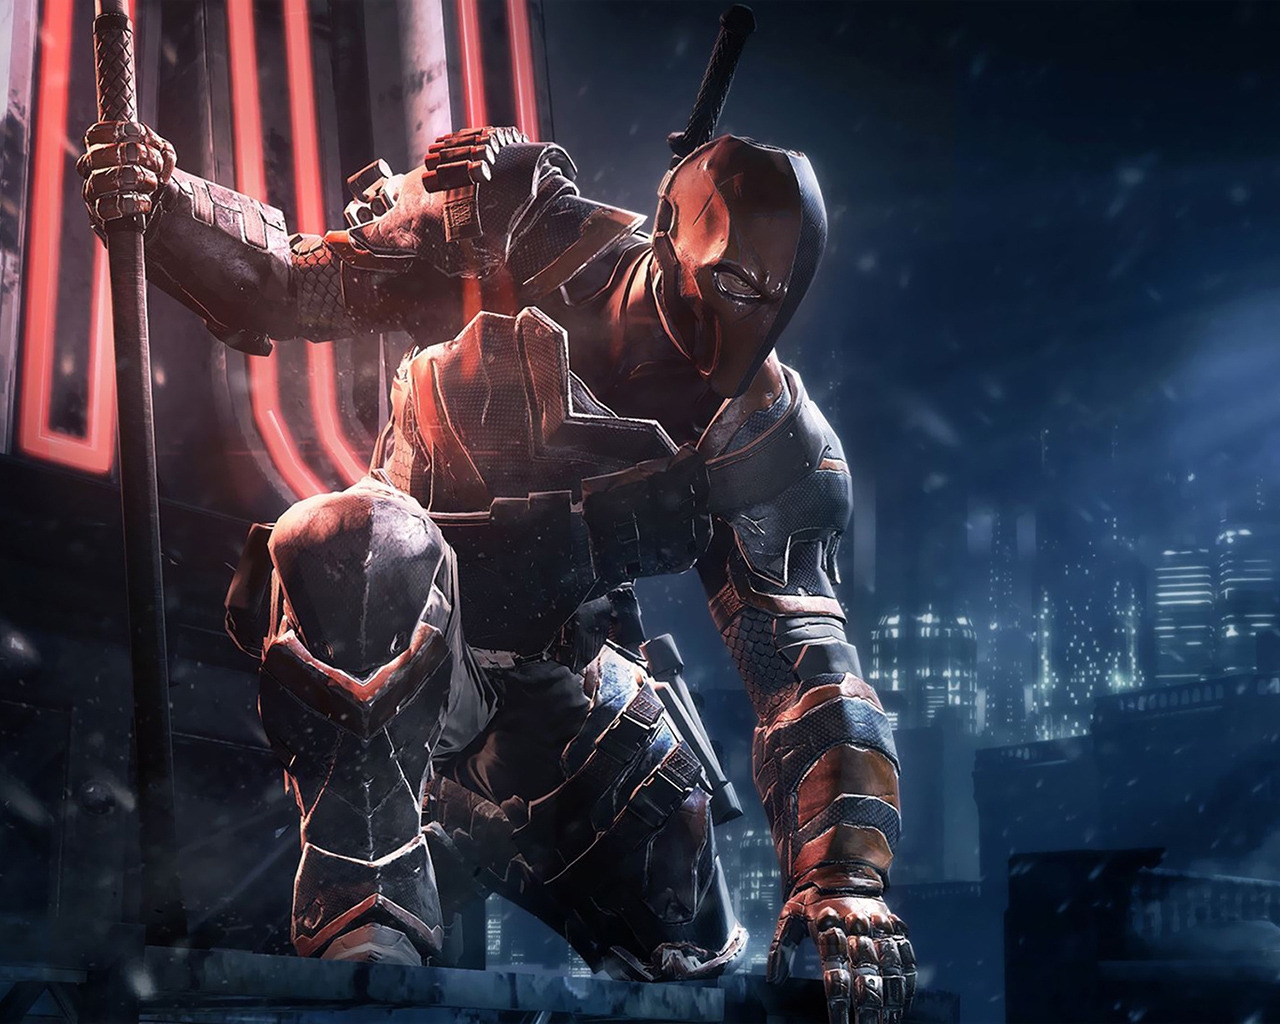 Deathstroke for 1280 x 1024 resolution